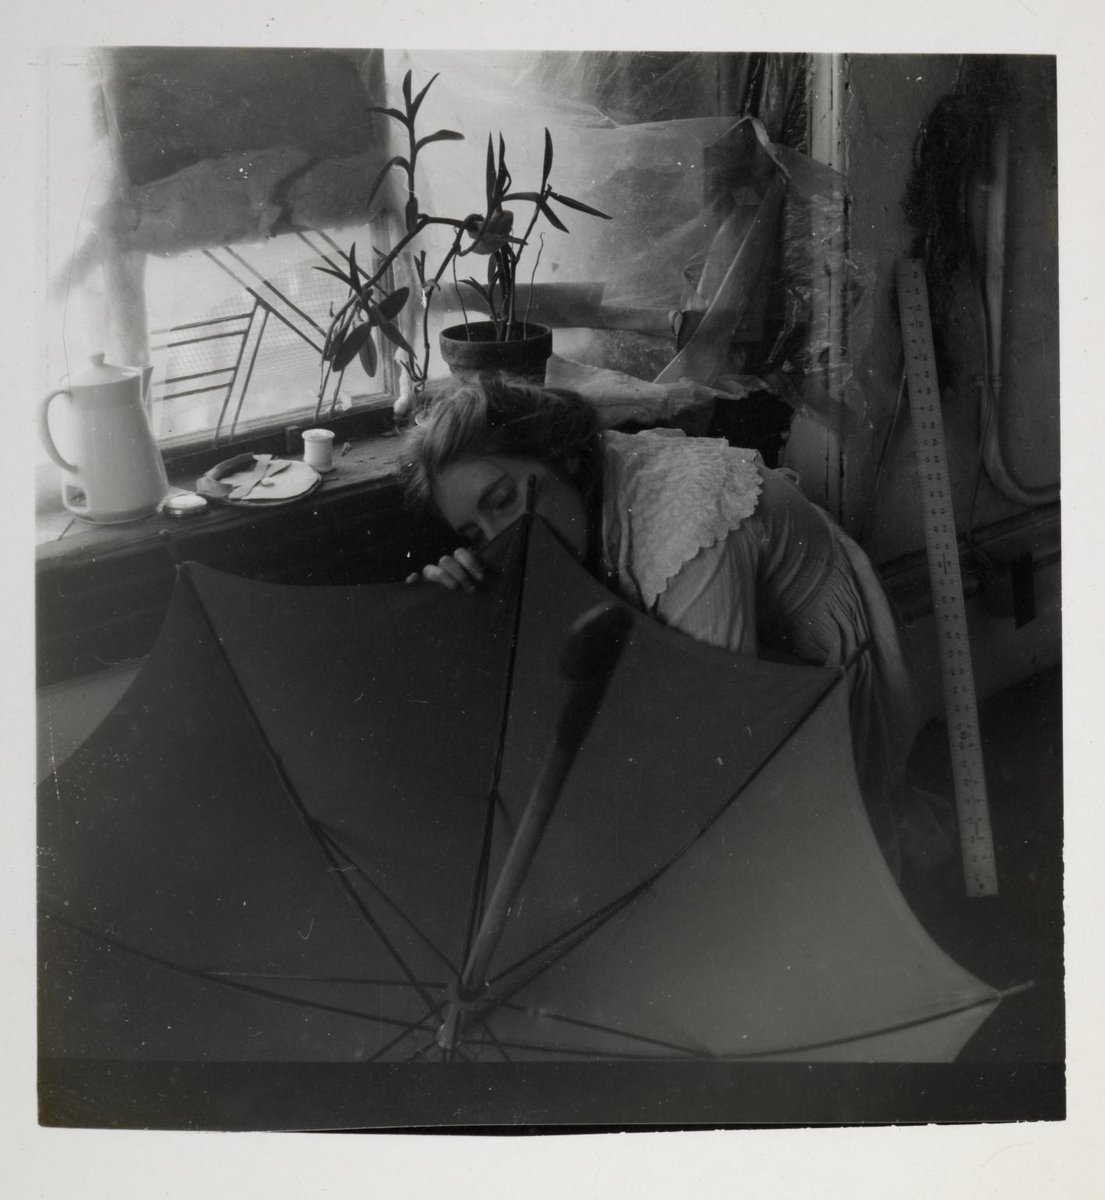 Today marks the birthday of the late photographer Francesca Woodman (1958 – 1981). Untitled c.1980 is currently on view @NPGLondon, as part of the exhibition Francesca Woodman and Julia Margaret Cameron: Portraits to Dream In. tate.org.uk/art/artworks/w… @Tate @NatGalleriesSco